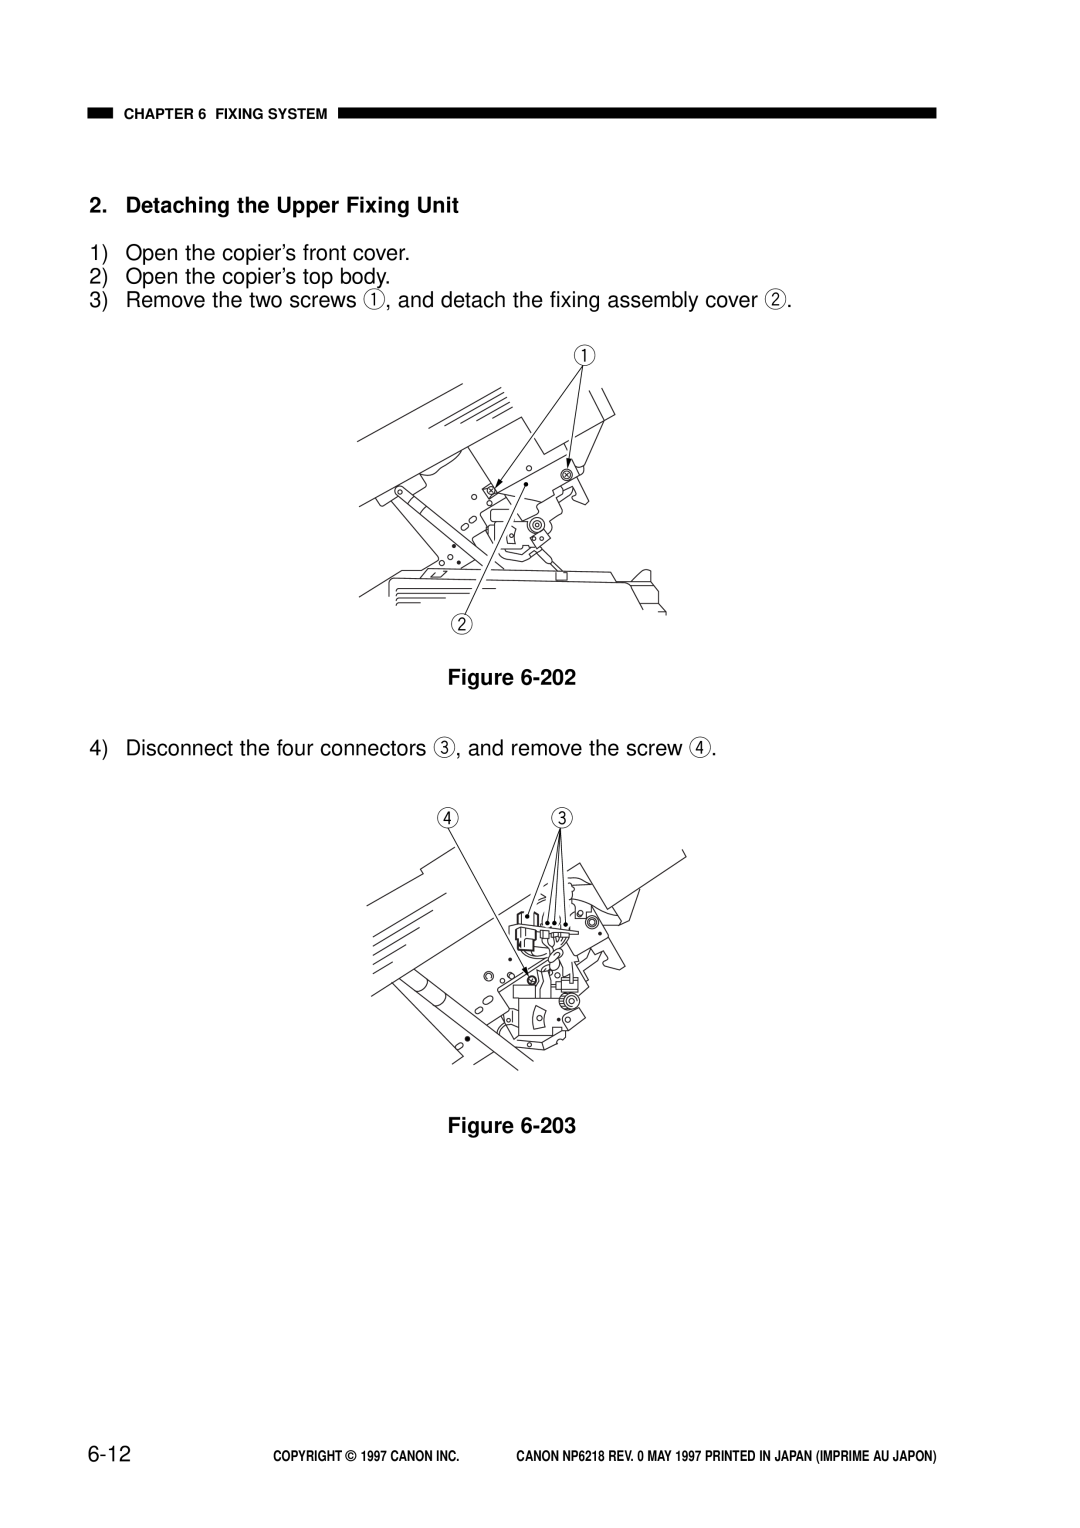 Canon NP6218, FY8-13EX-000 service manual Detaching the Upper Fixing Unit, 6-12, Fixing System, COPYRIGHT 1997 CANON INC 